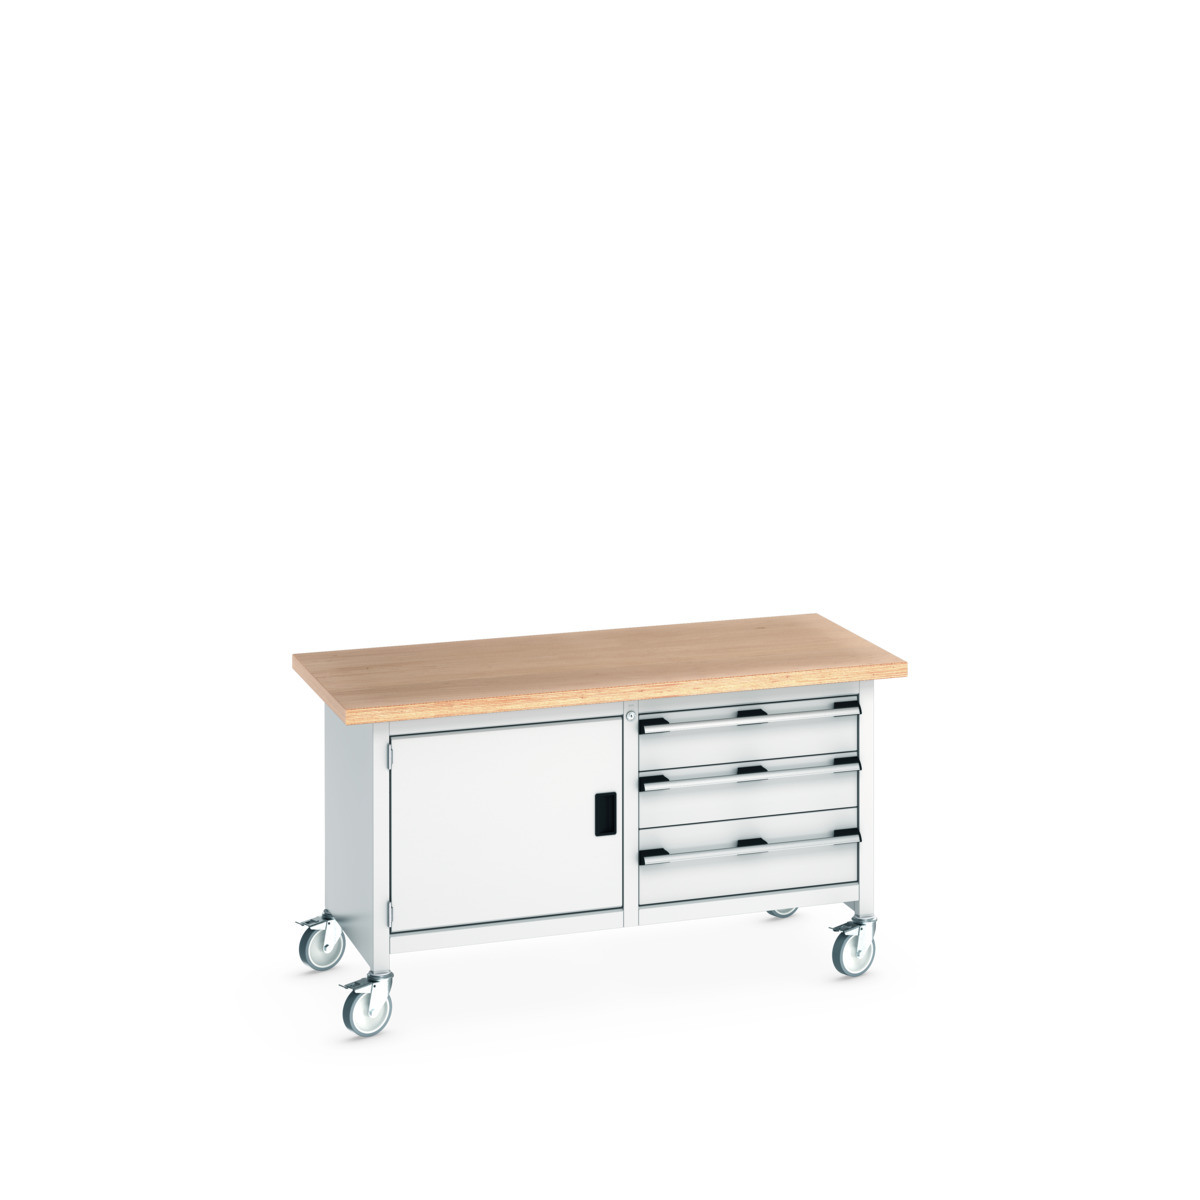 41002100.16V - cubio mobile storage bench (mpx)